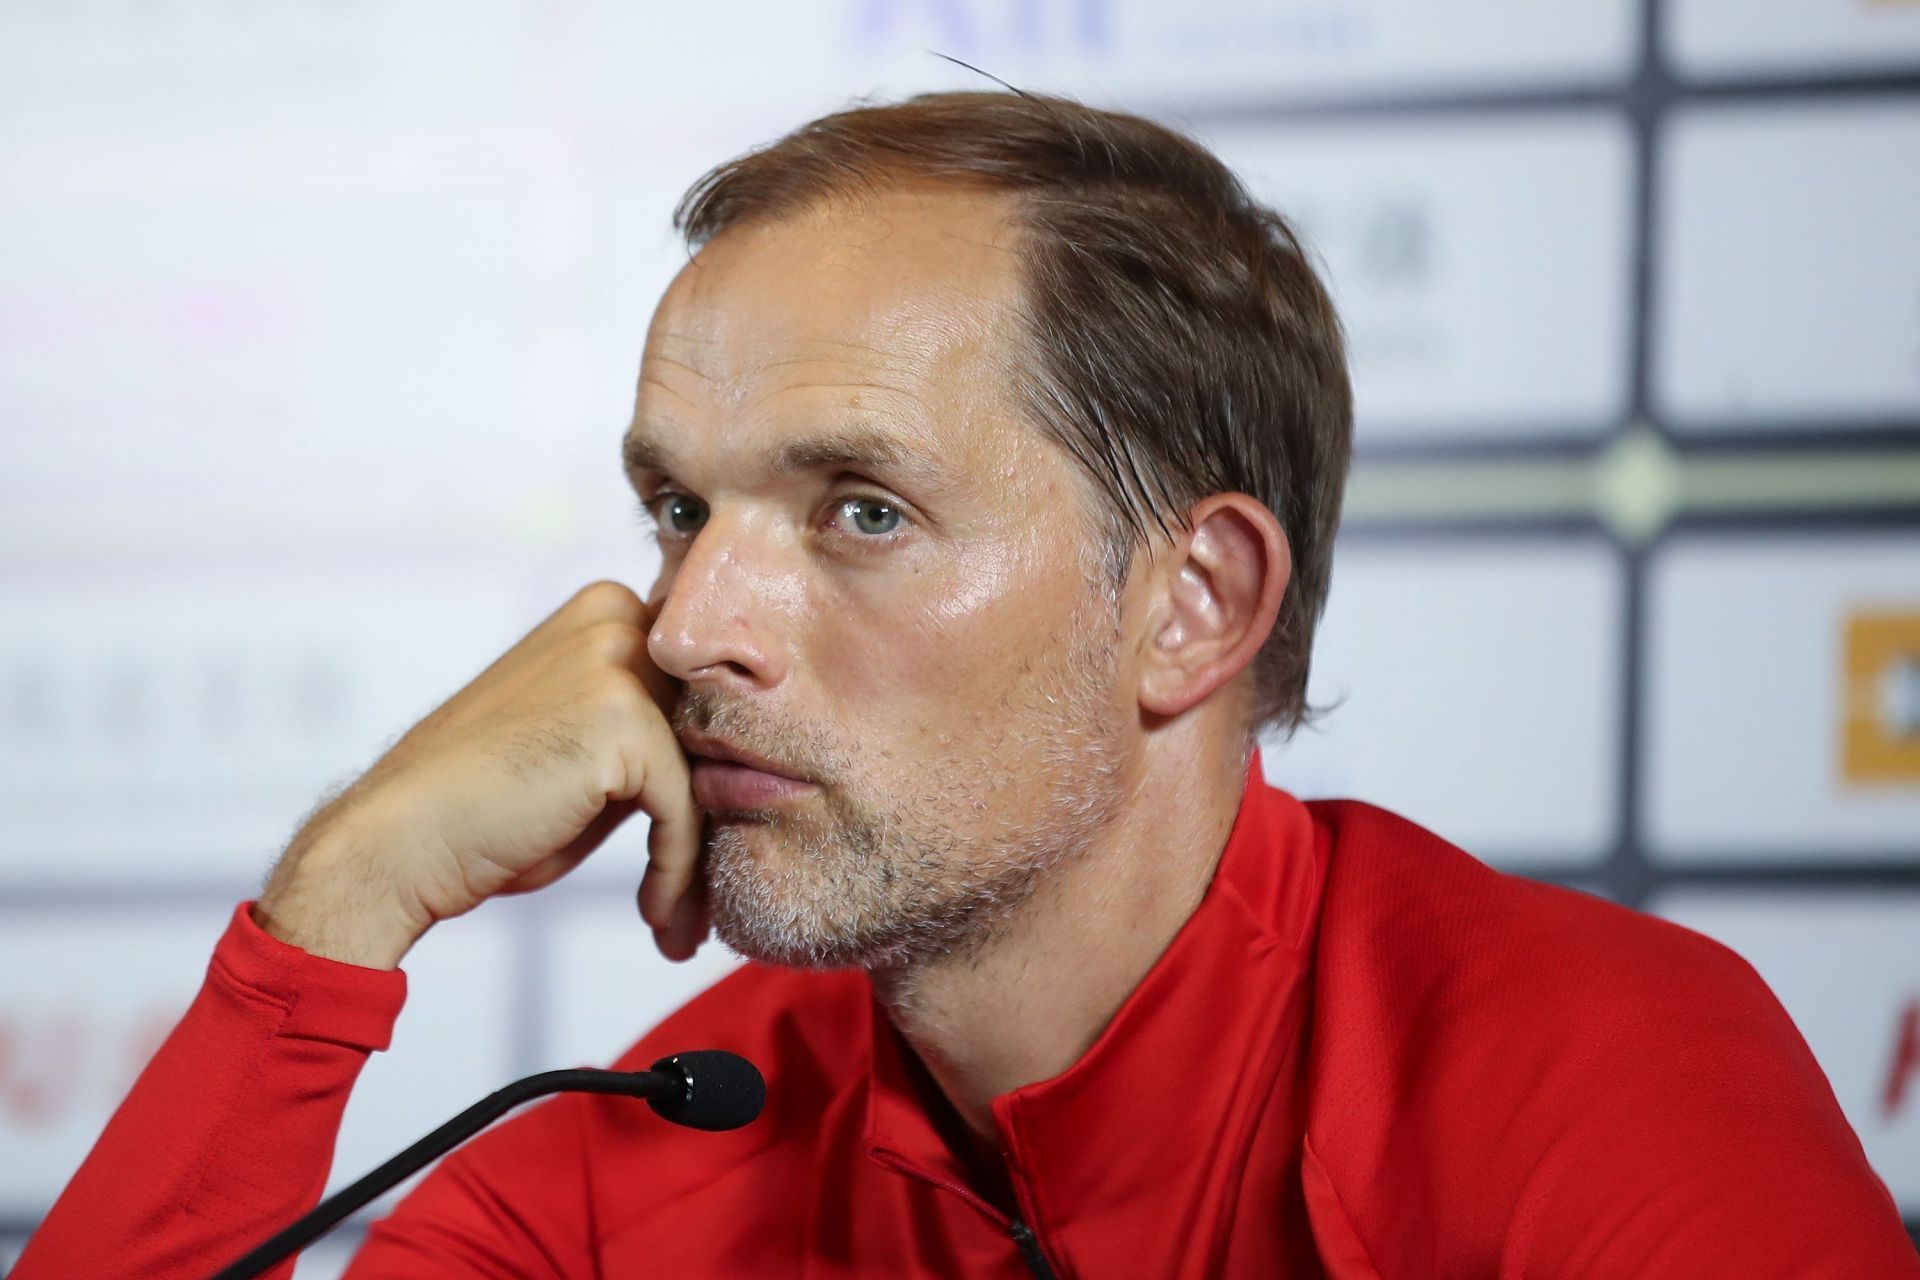 Thomas Tuchel is the current manager of Chelsea